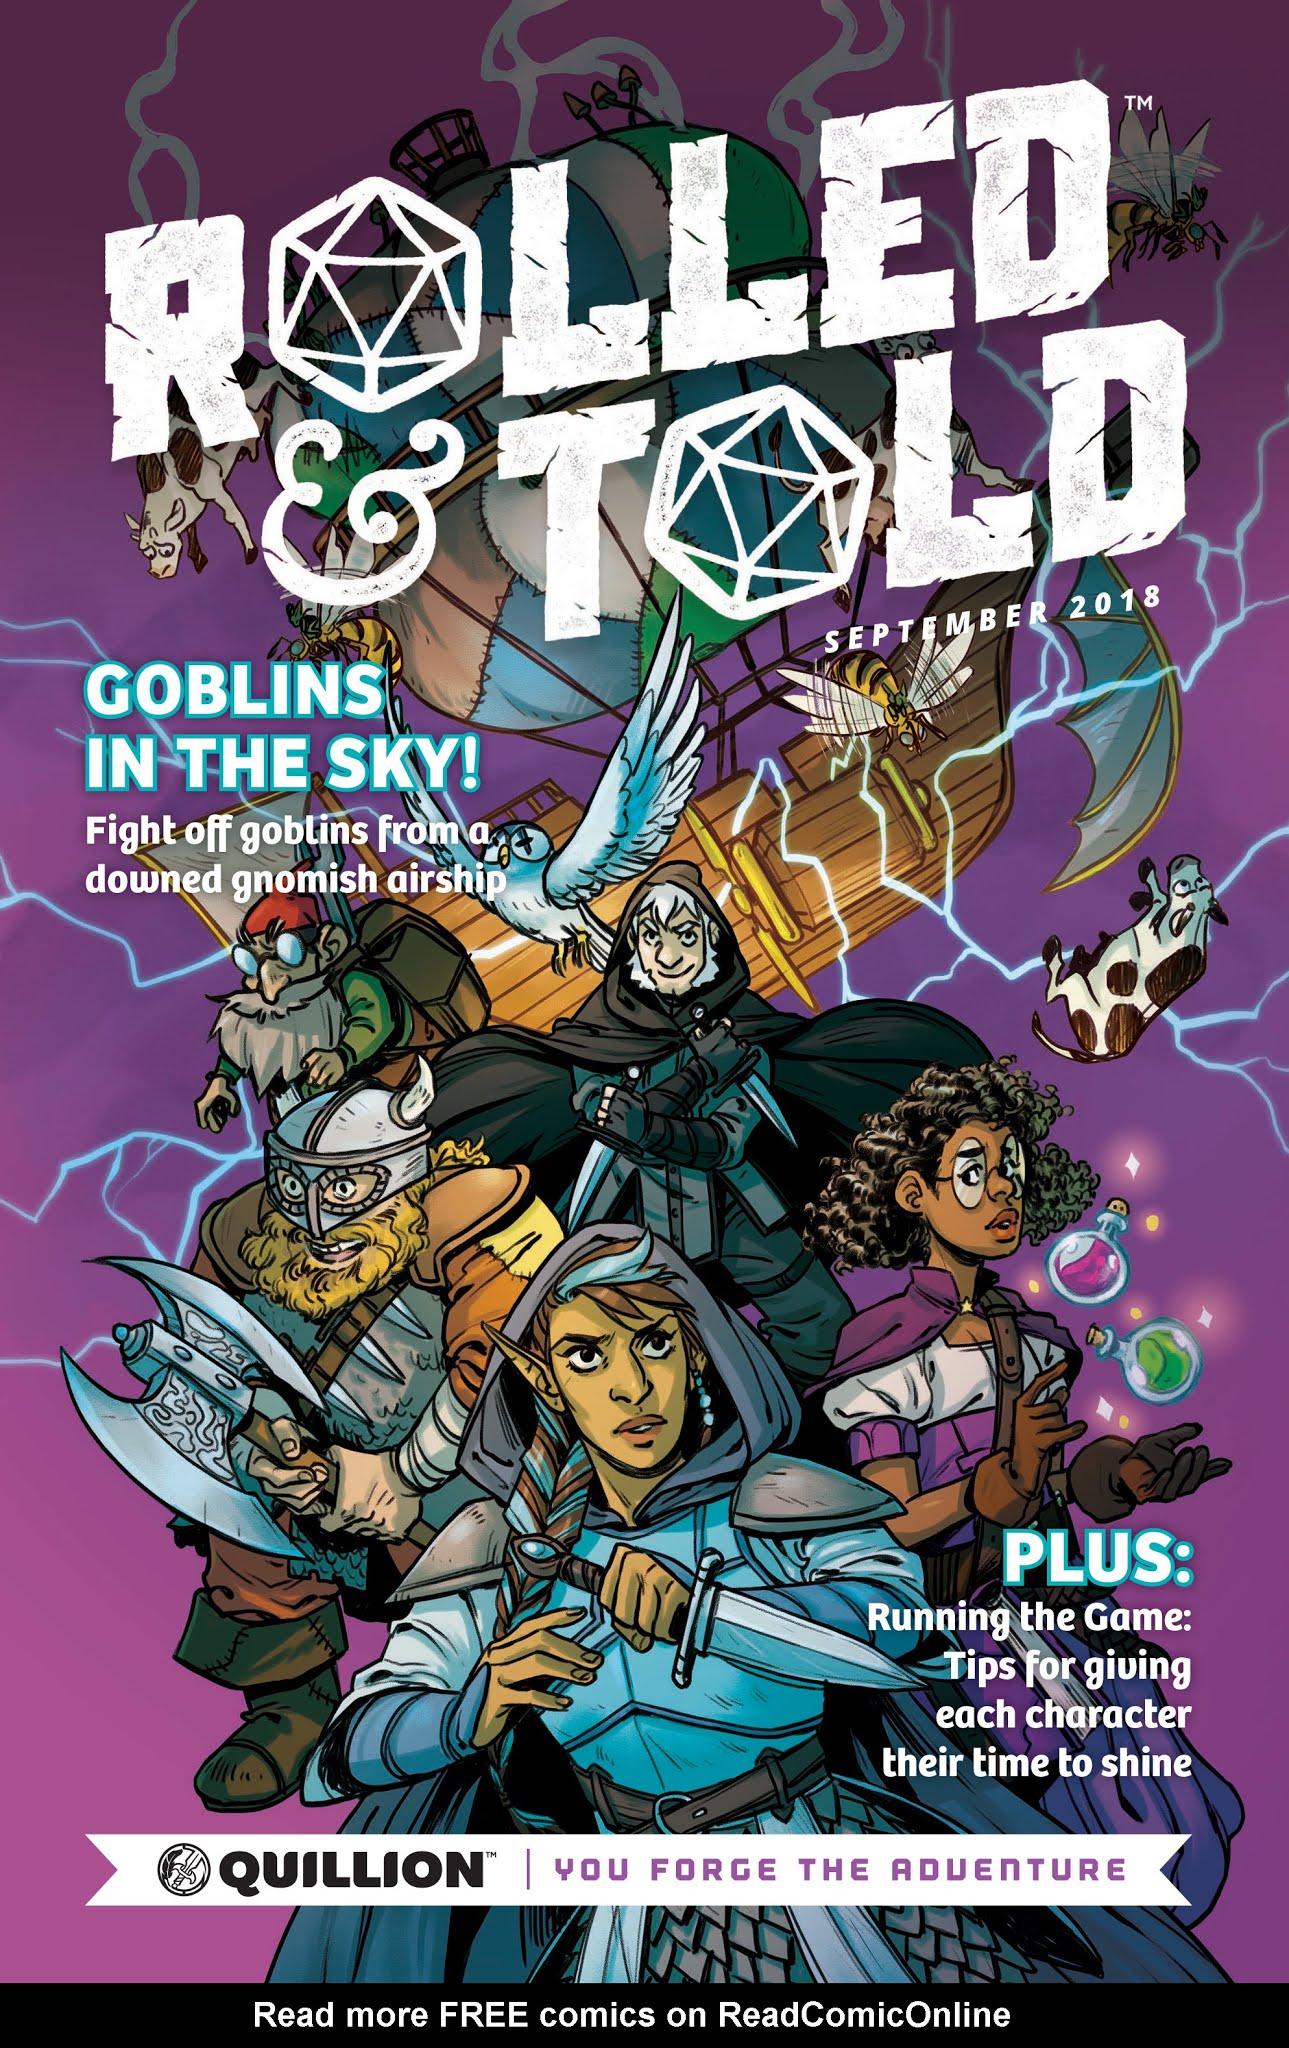 Read online Rolled & Told comic -  Issue #1 - 1